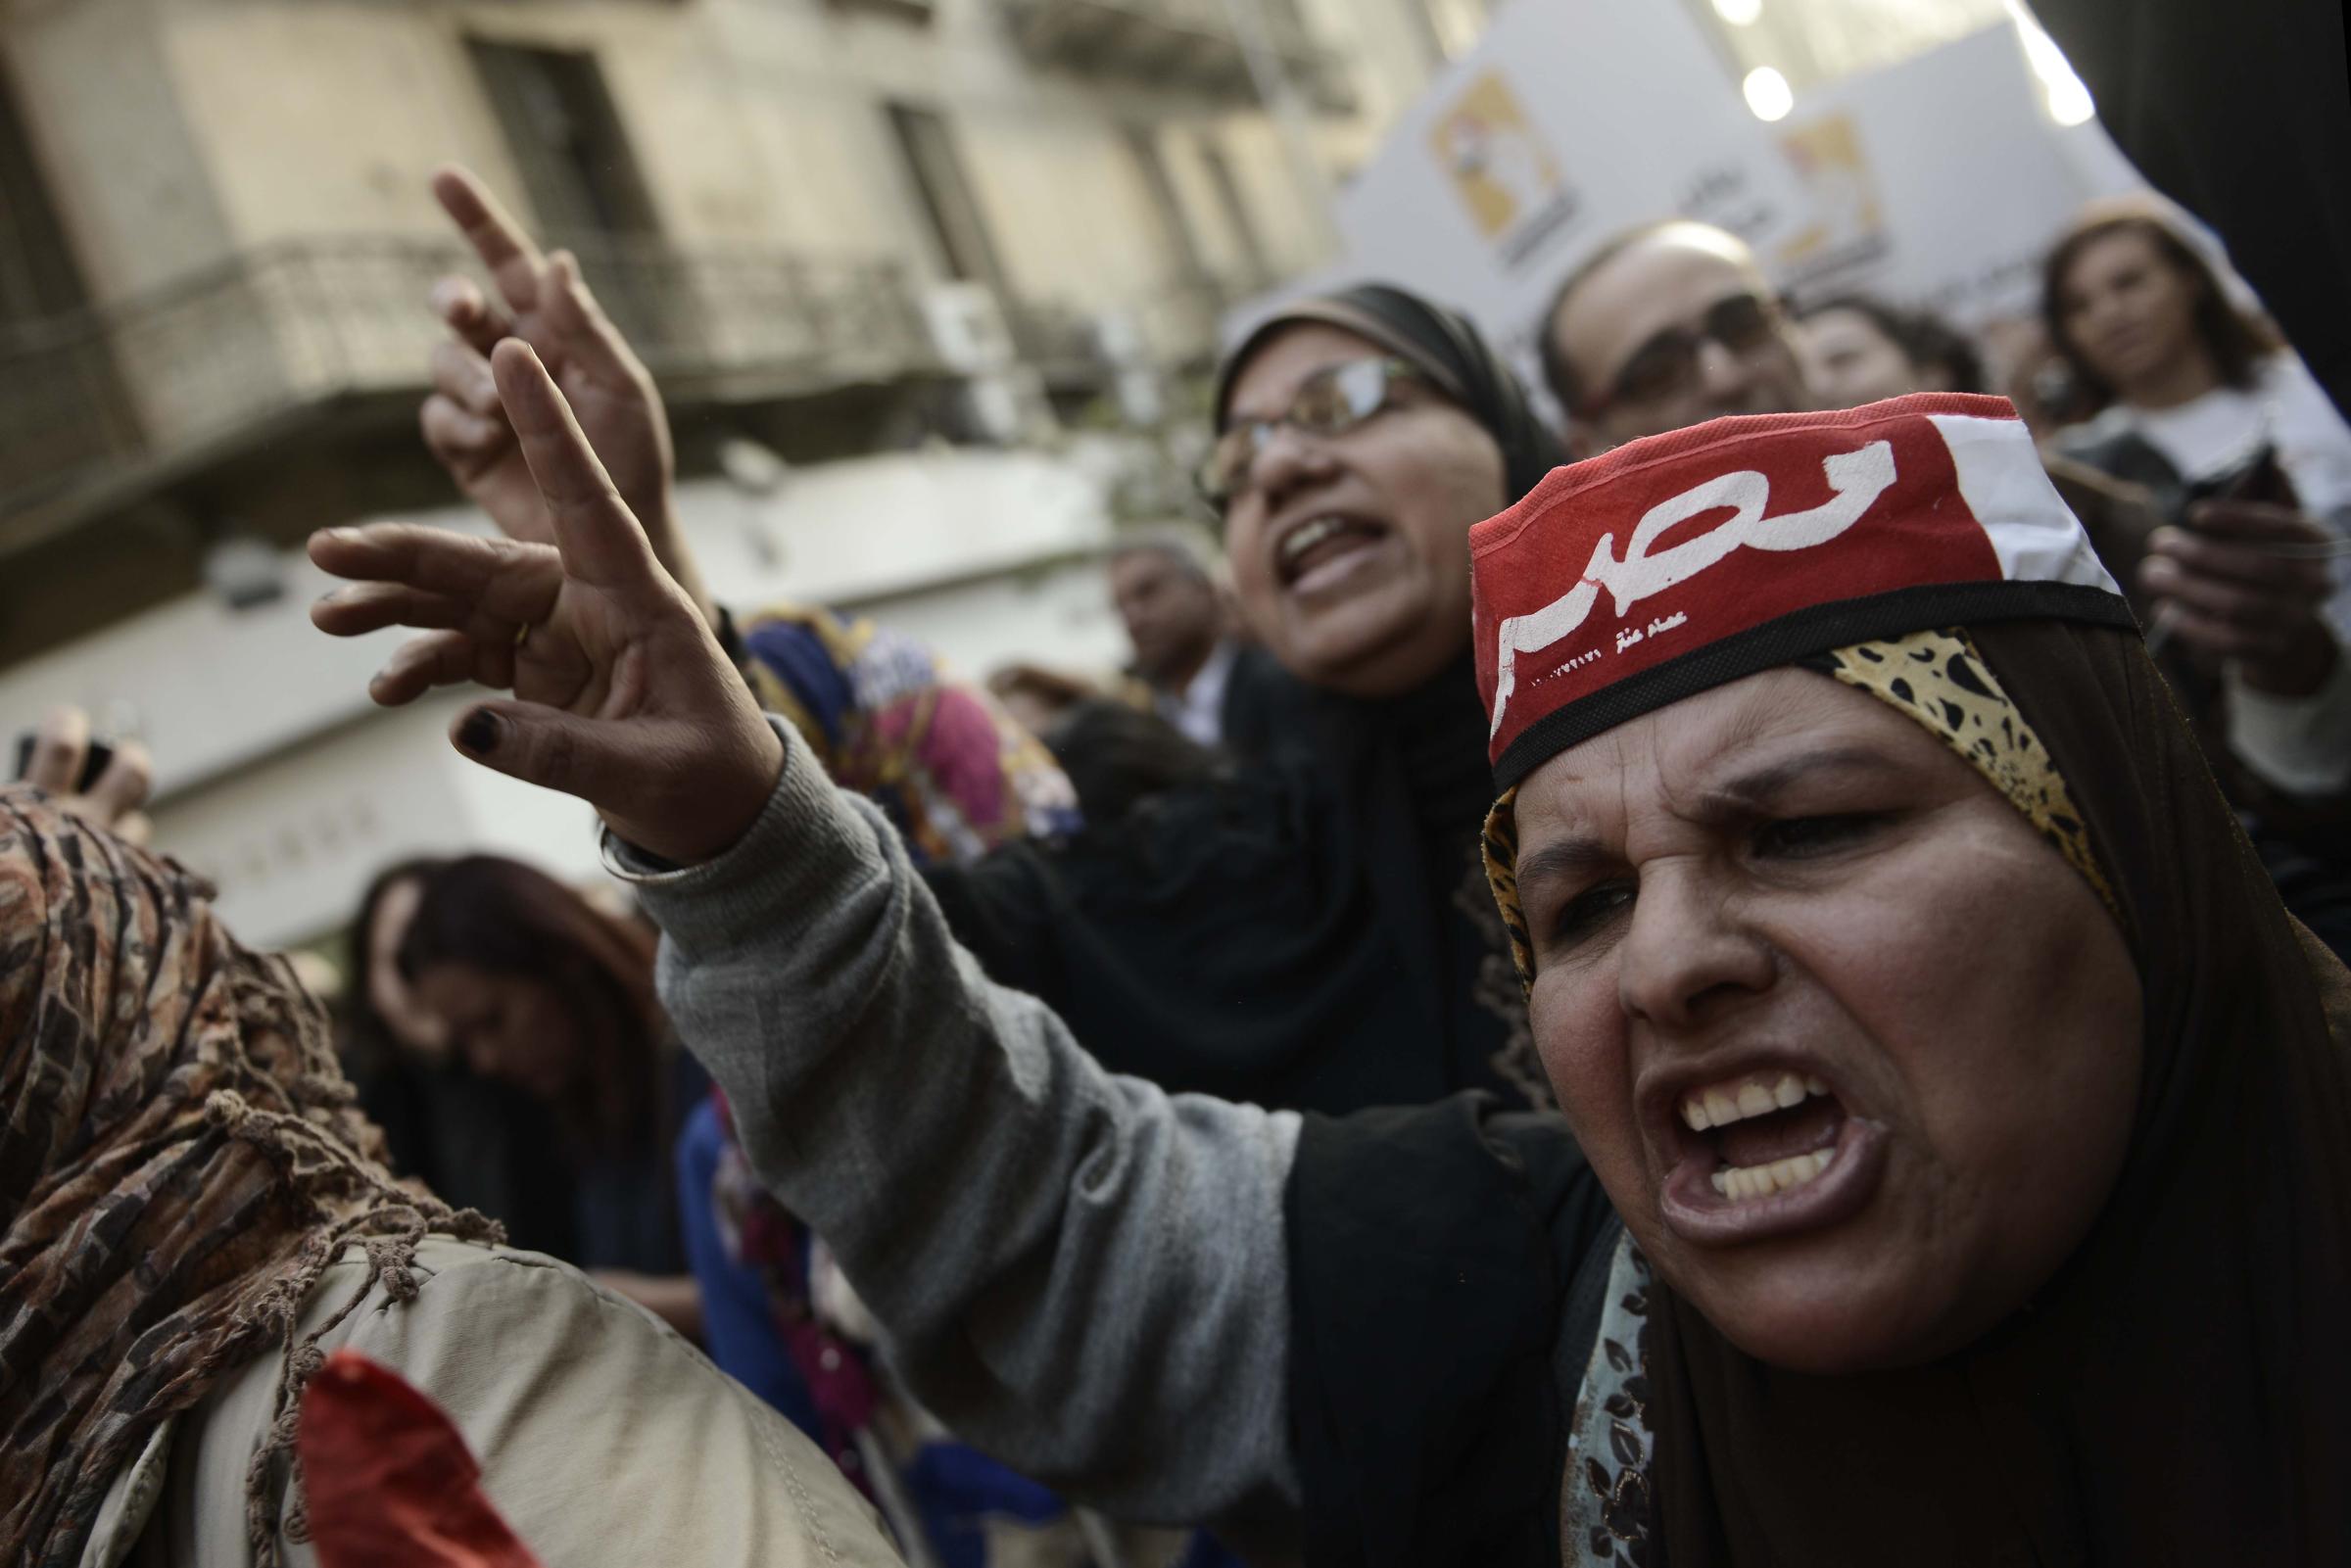 After the Egyptian revolution - 